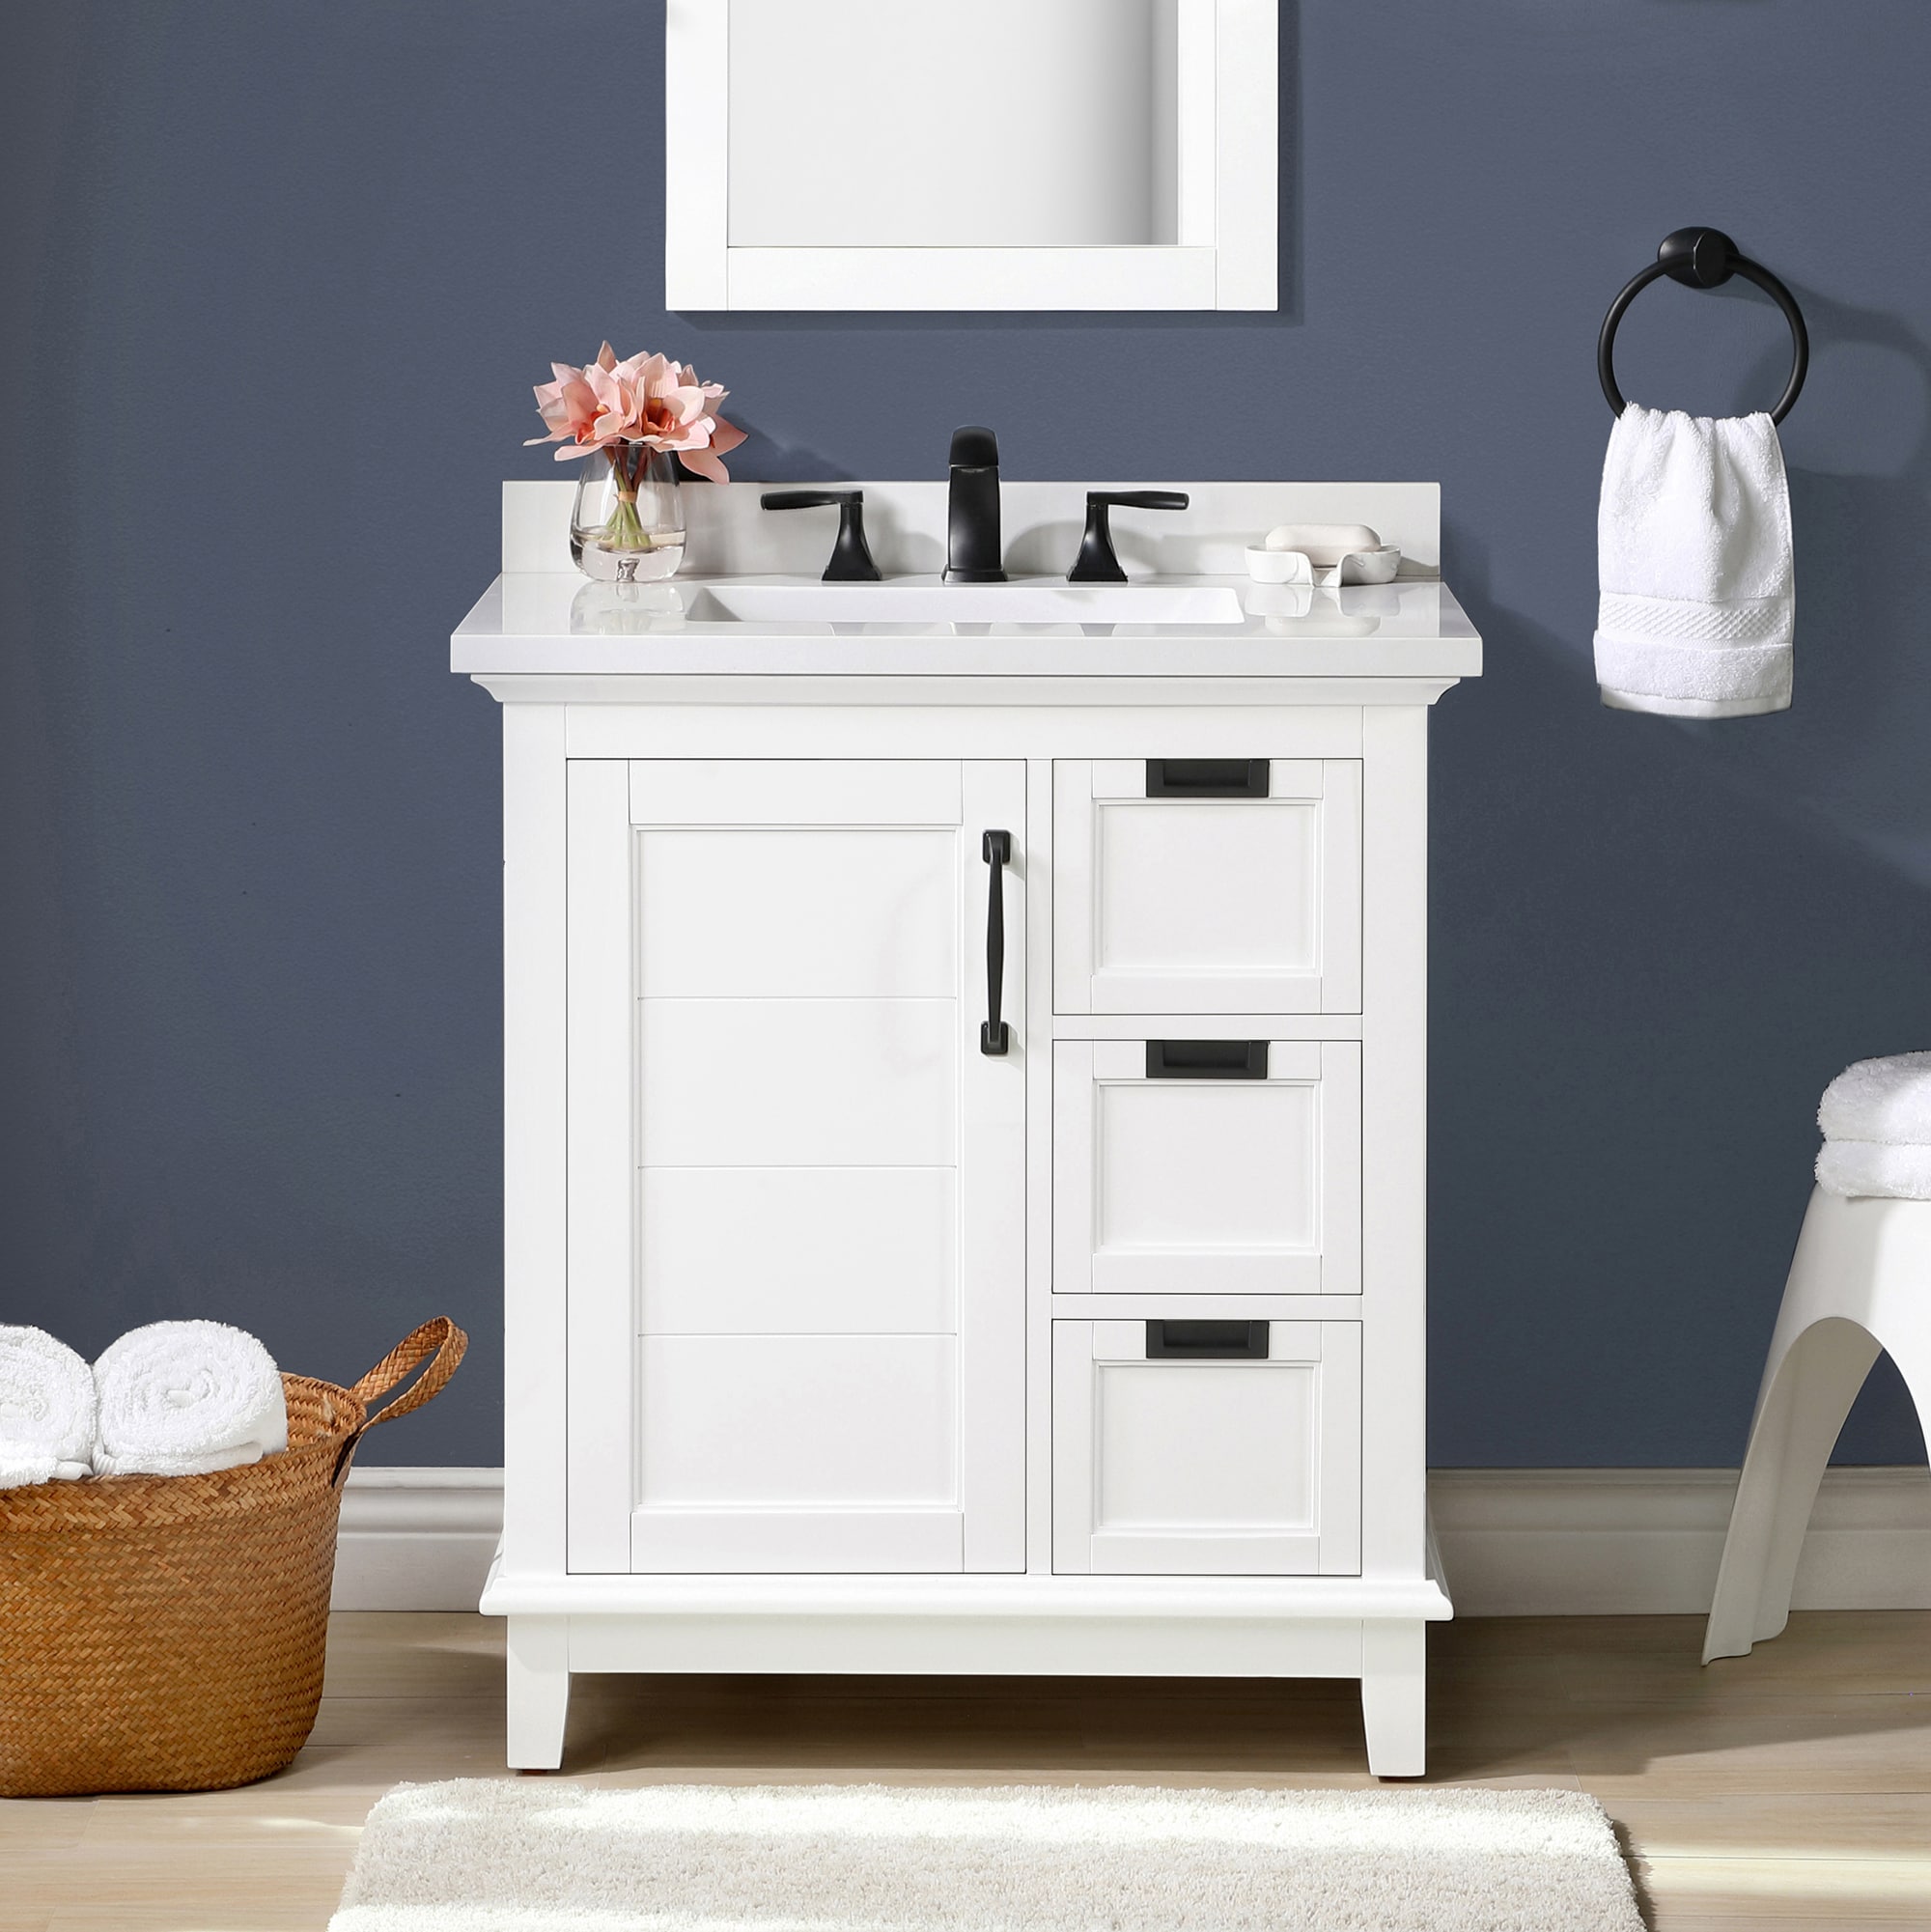 allen + roth Clarita 30-in White Undermount Single Sink Bathroom Vanity  with White Engineered Stone Top in the Bathroom Vanities with Tops  department at Lowes.com